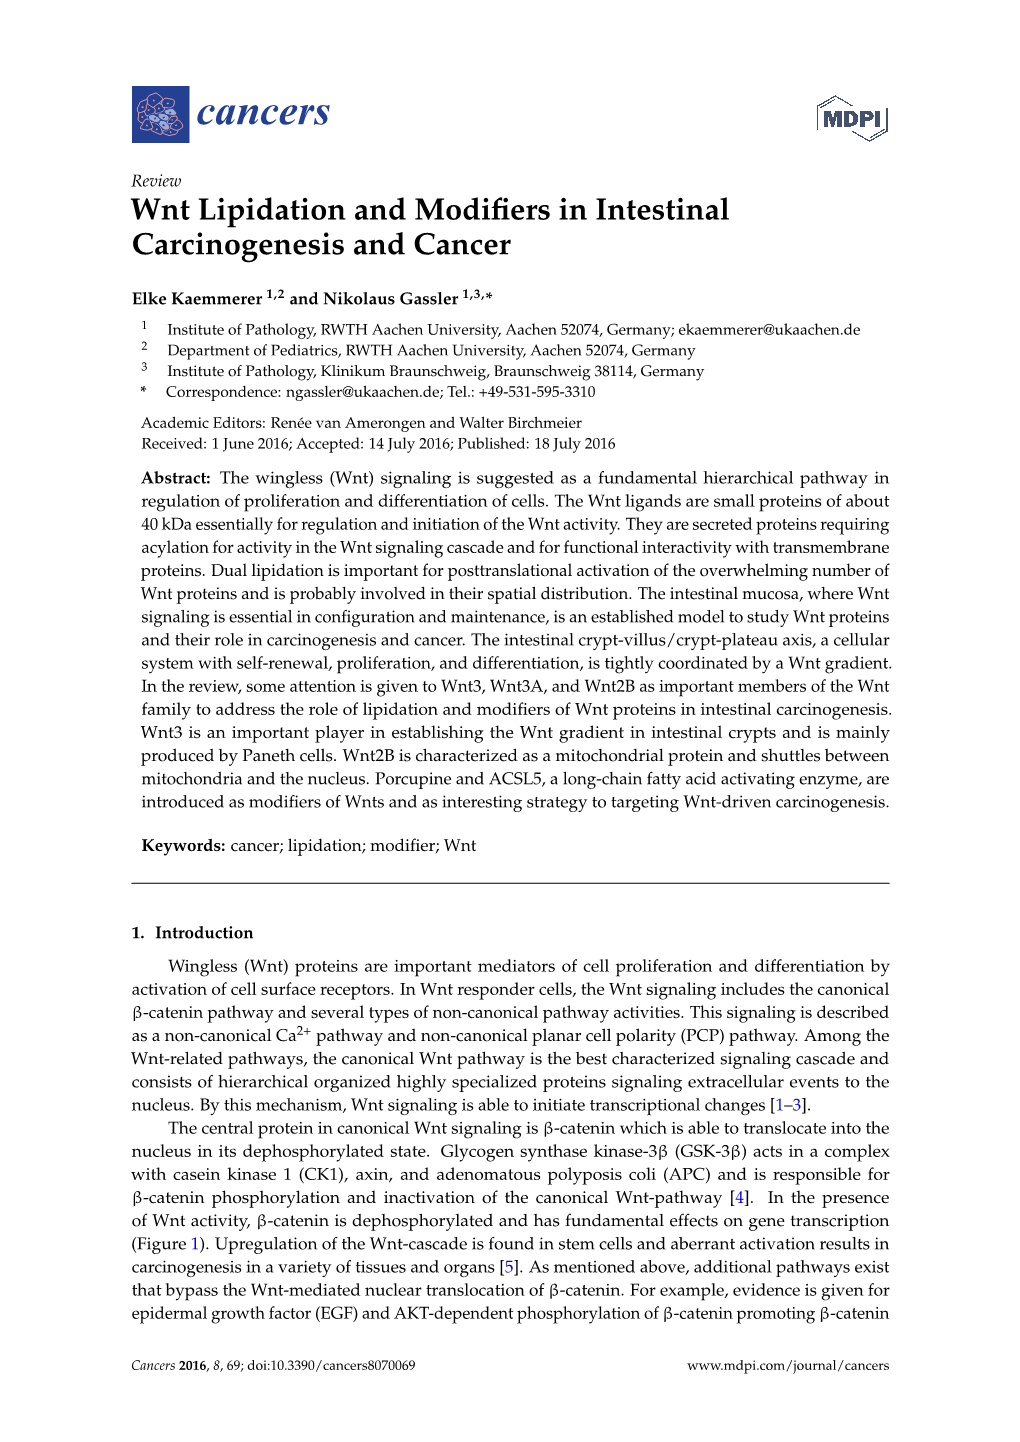 Wnt Lipidation and Modifiers in Intestinal Carcinogenesis and Cancer